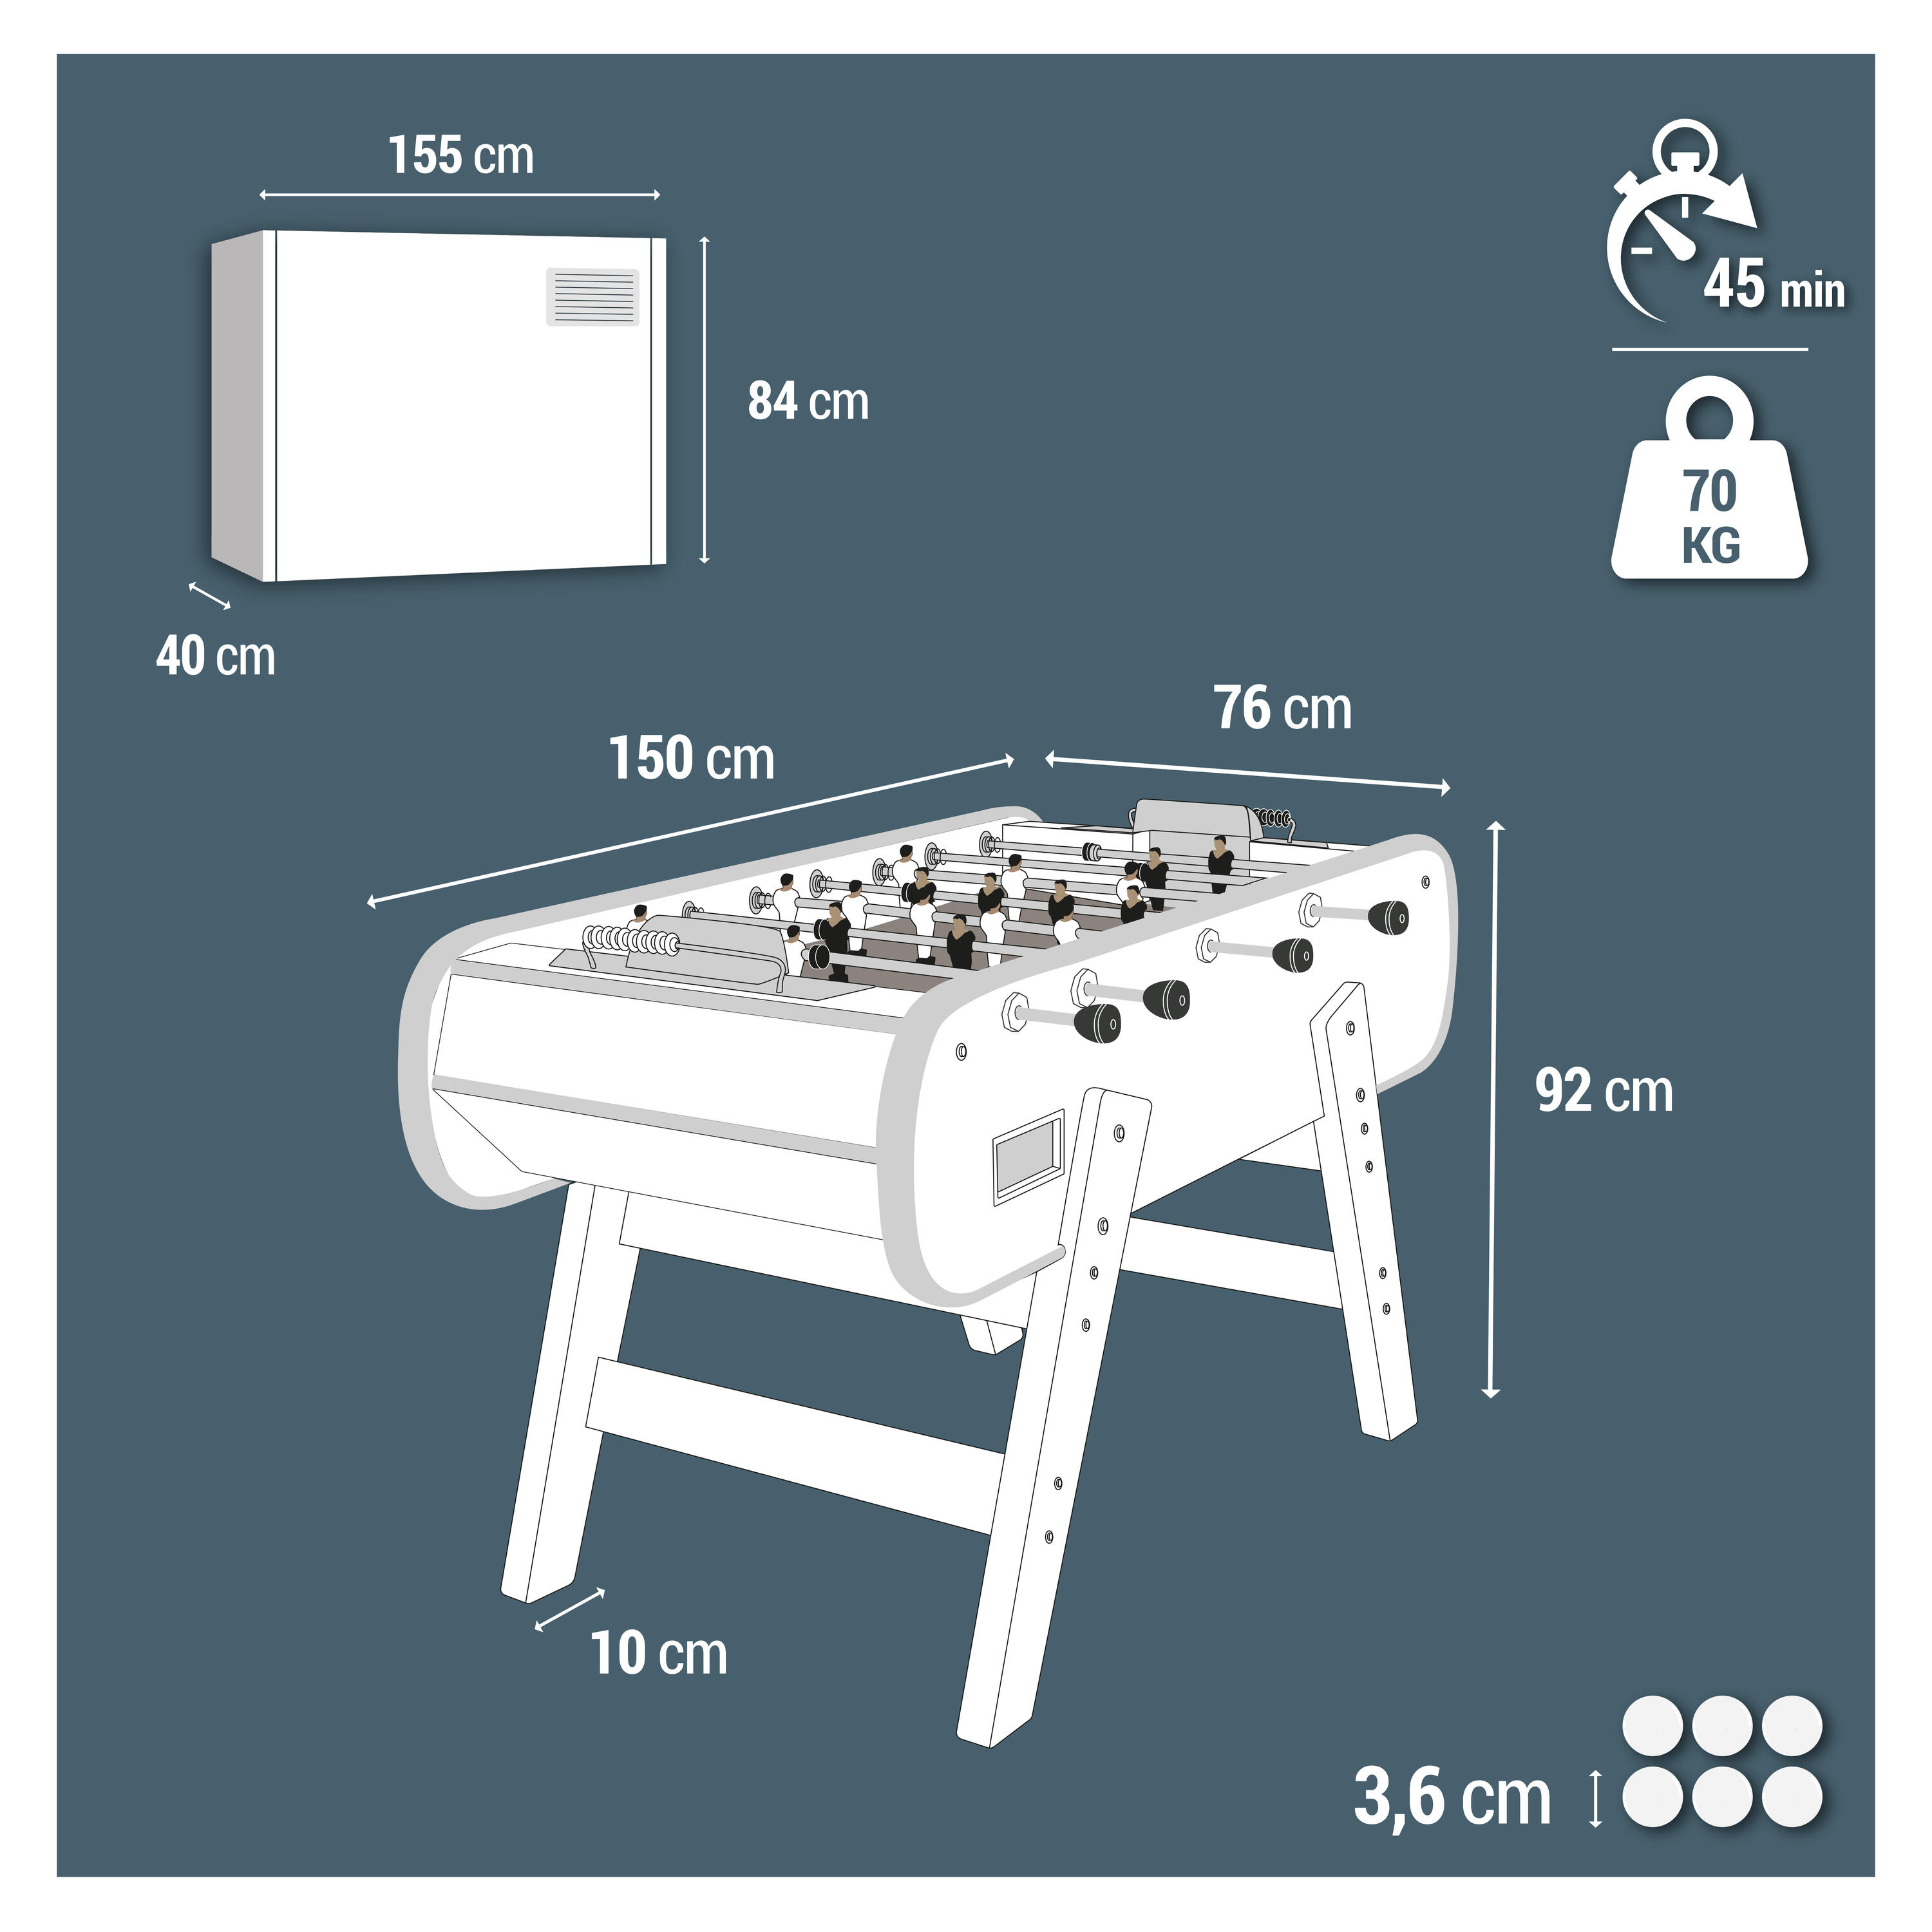 Indoor Wooden Table Football Table BF 500 - Grey Pitch 2/15